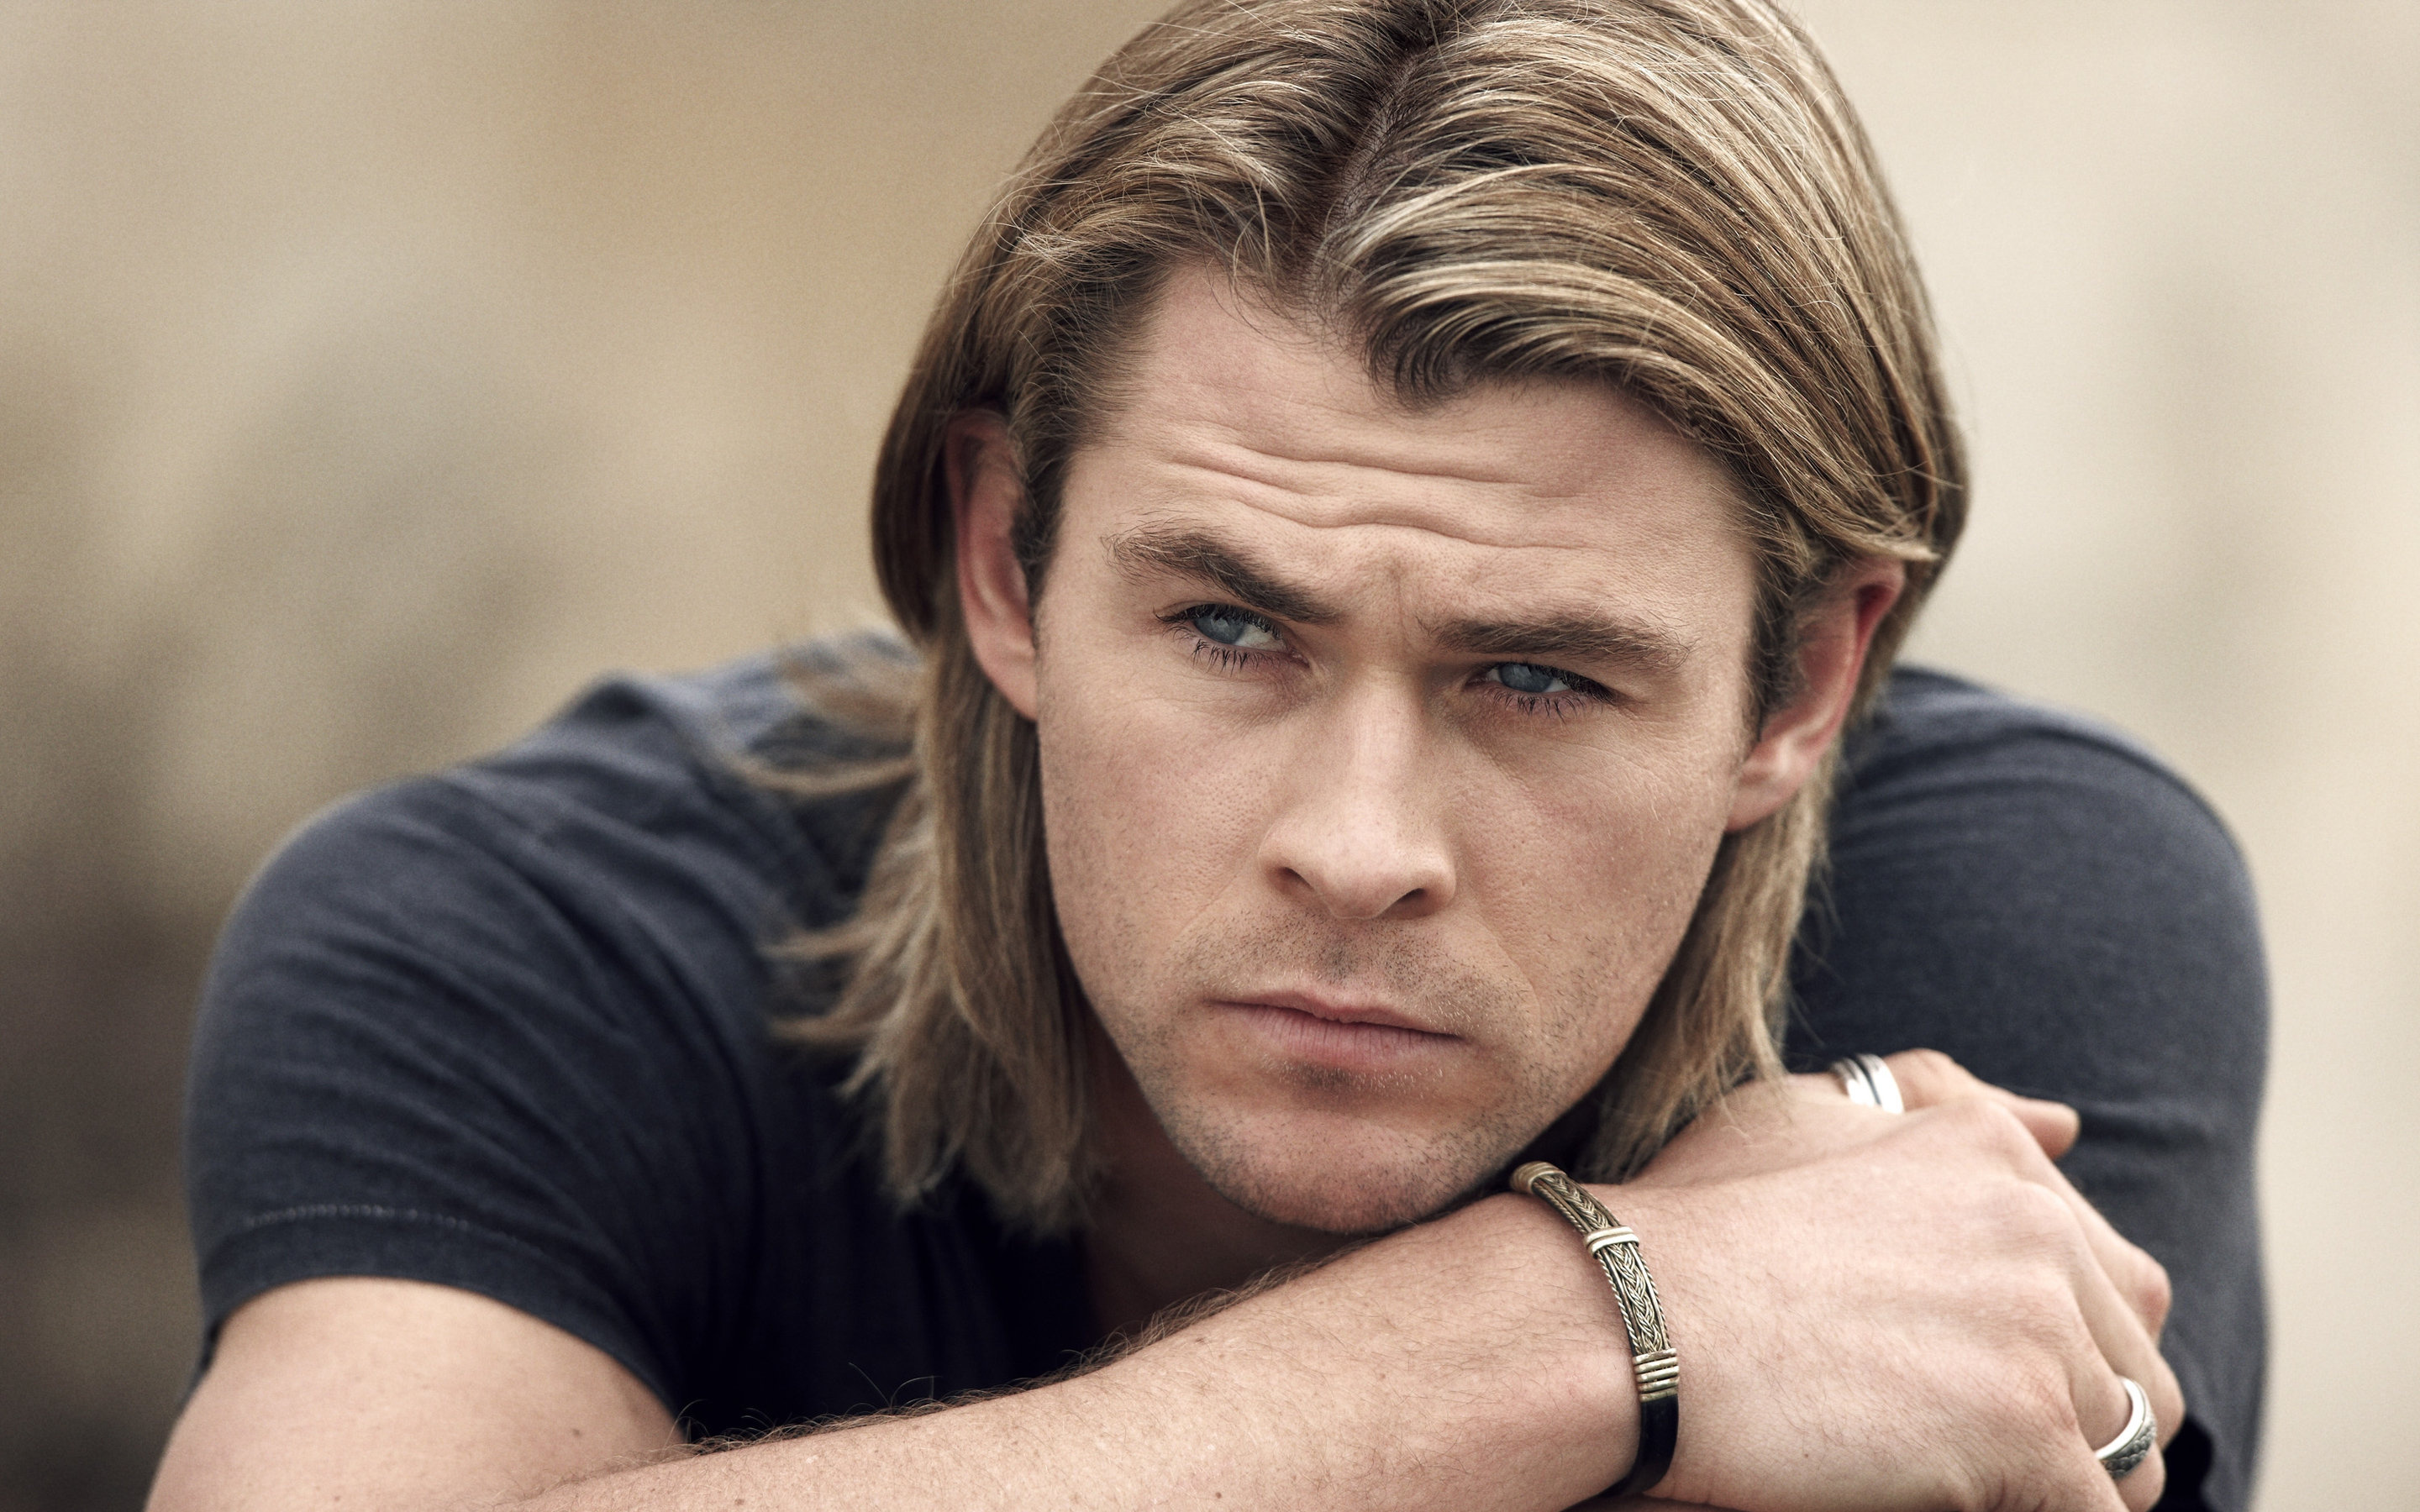 Chris Hemsworth: Kale Garrity in the thriller A Perfect Getaway, 2009. 2880x1800 HD Background.